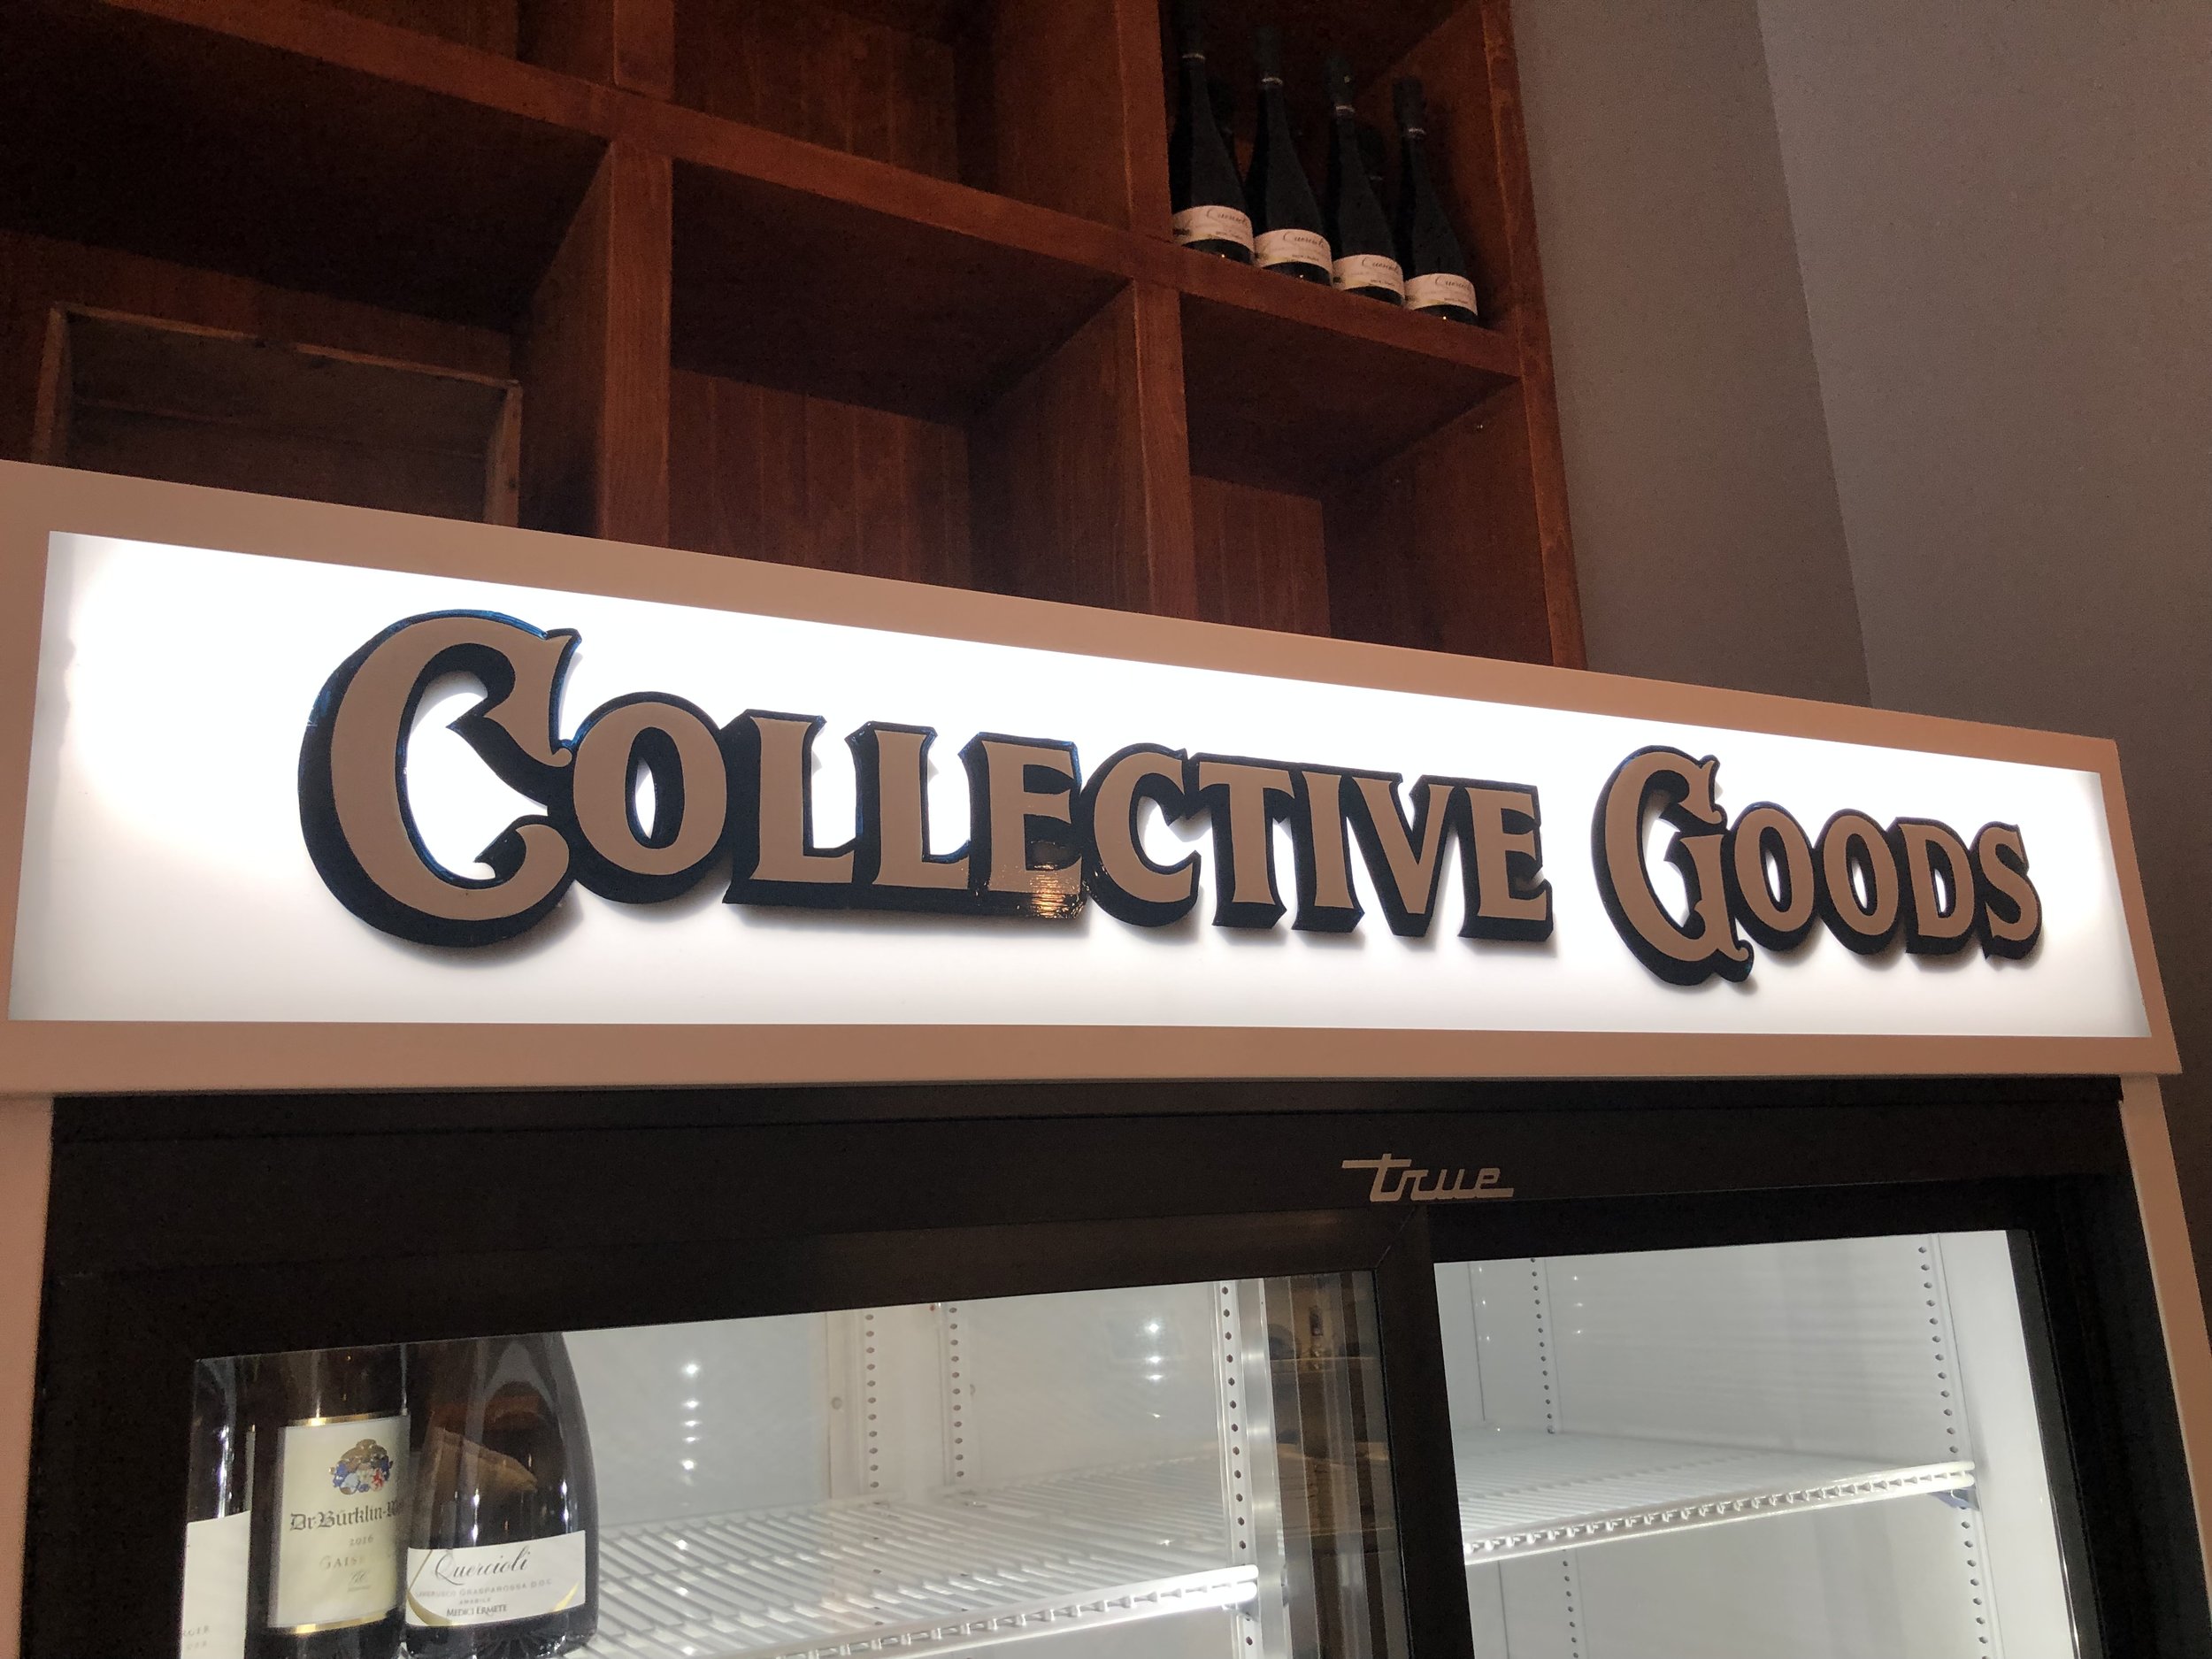 Collective Goods